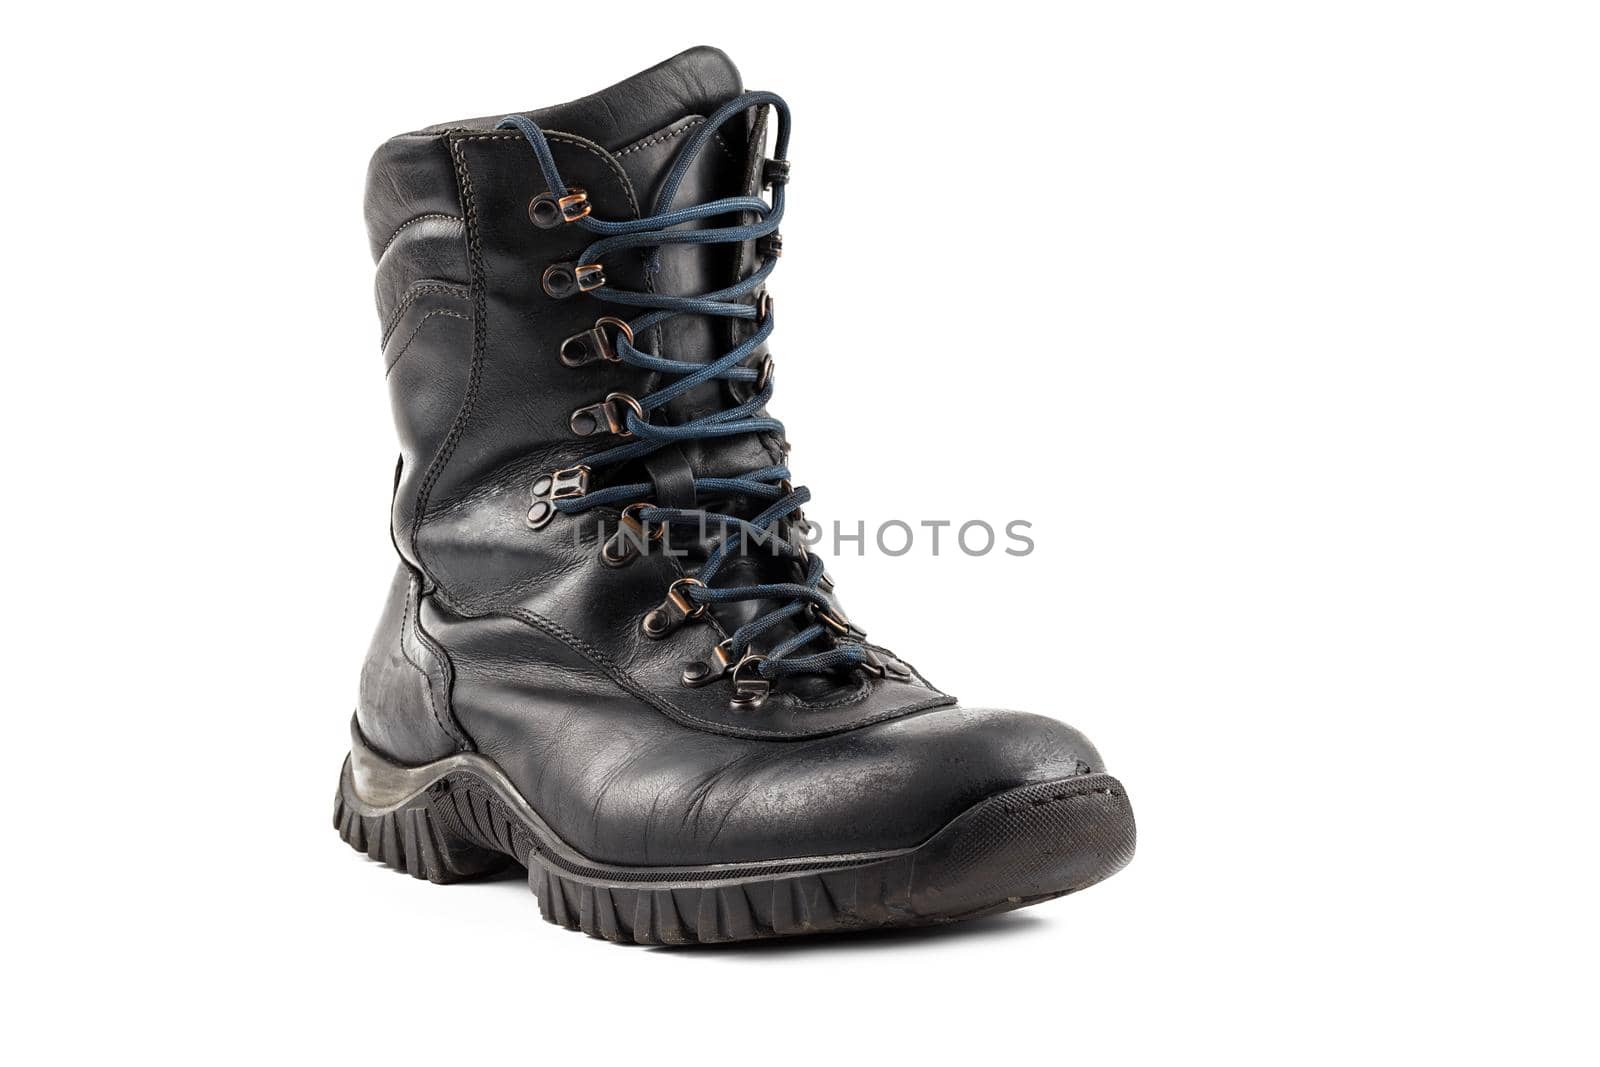 one black leather used clean civillian men 8-inch ankle boot, perspective view, isolated on white